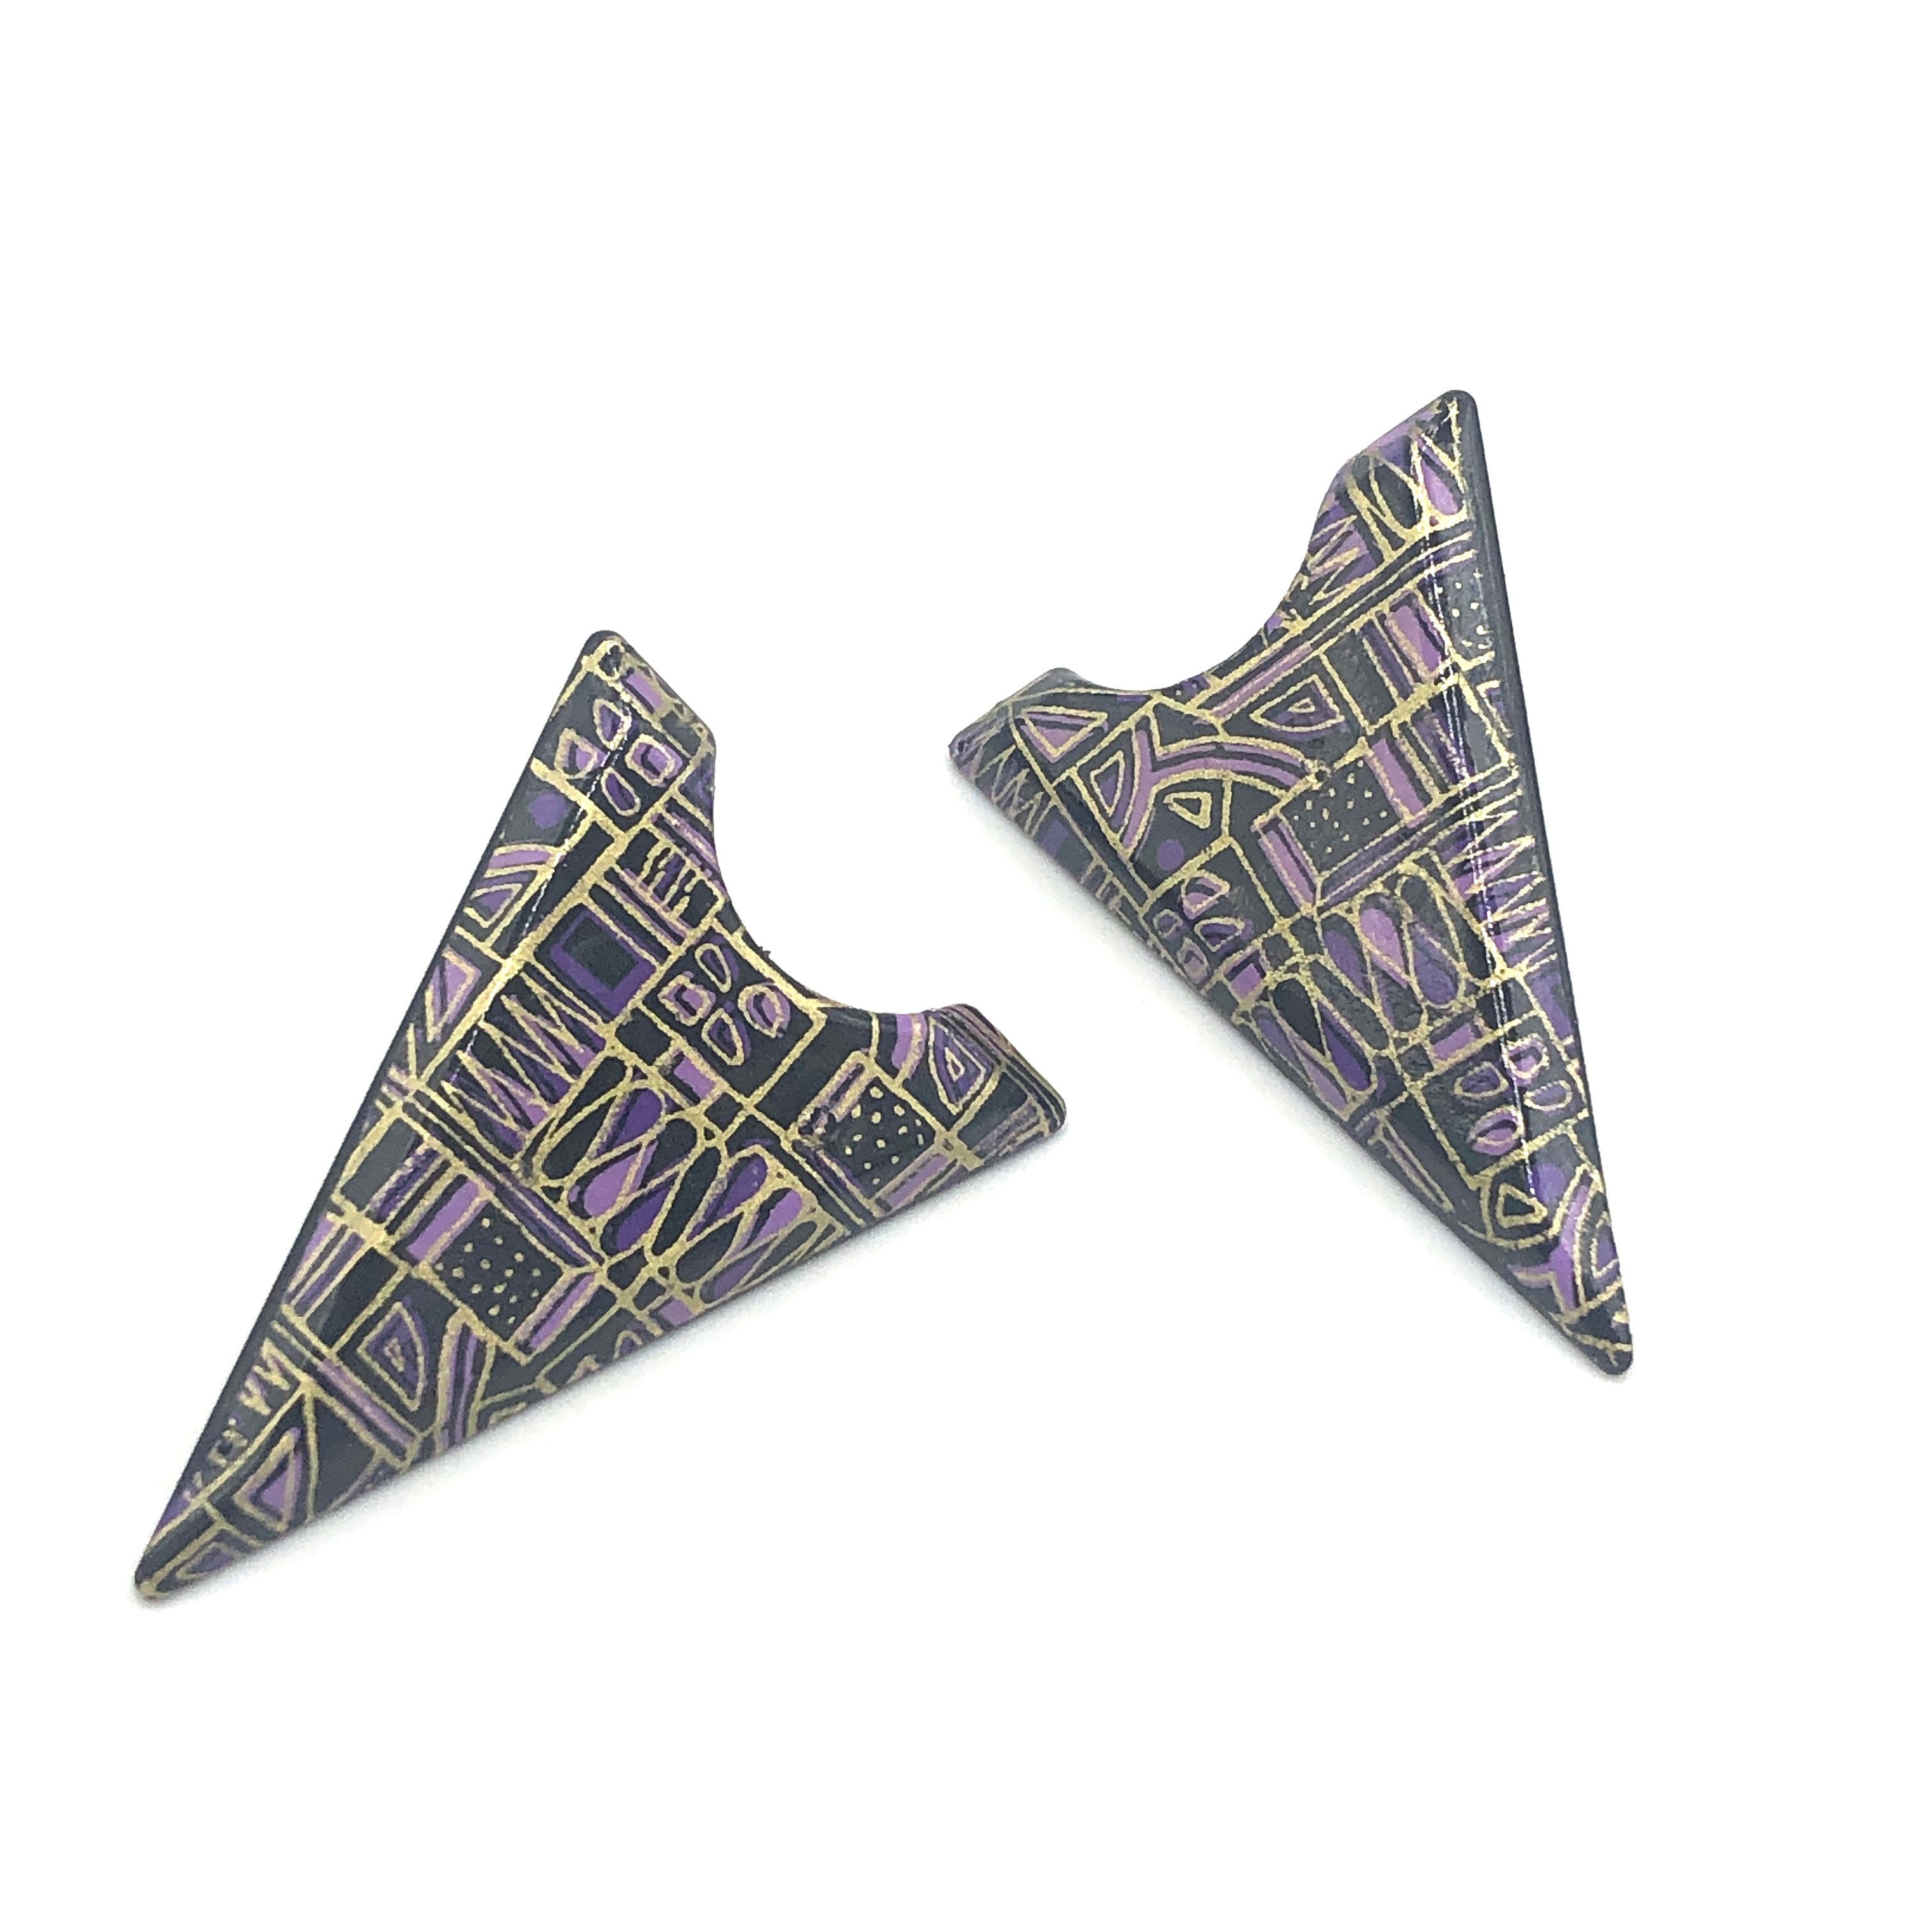 Graphic Etched Pyramid Stud Earrings